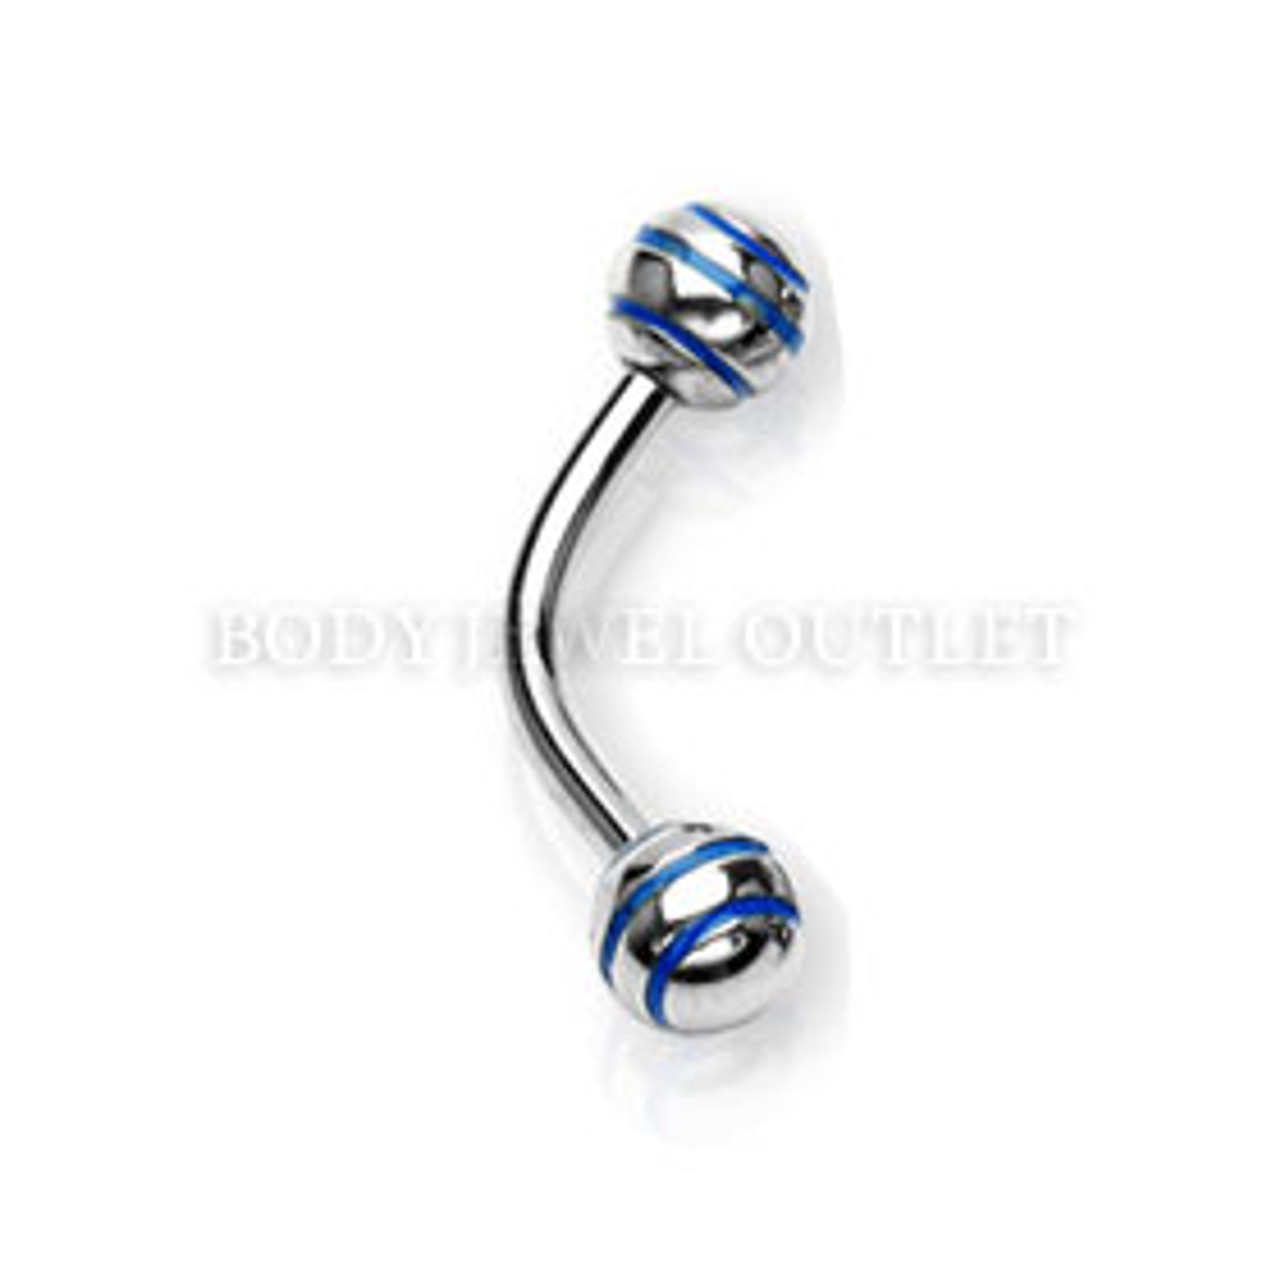 Eyebrow Piercing Steel Ball with Blue Stripes | BodyJewelOutlet